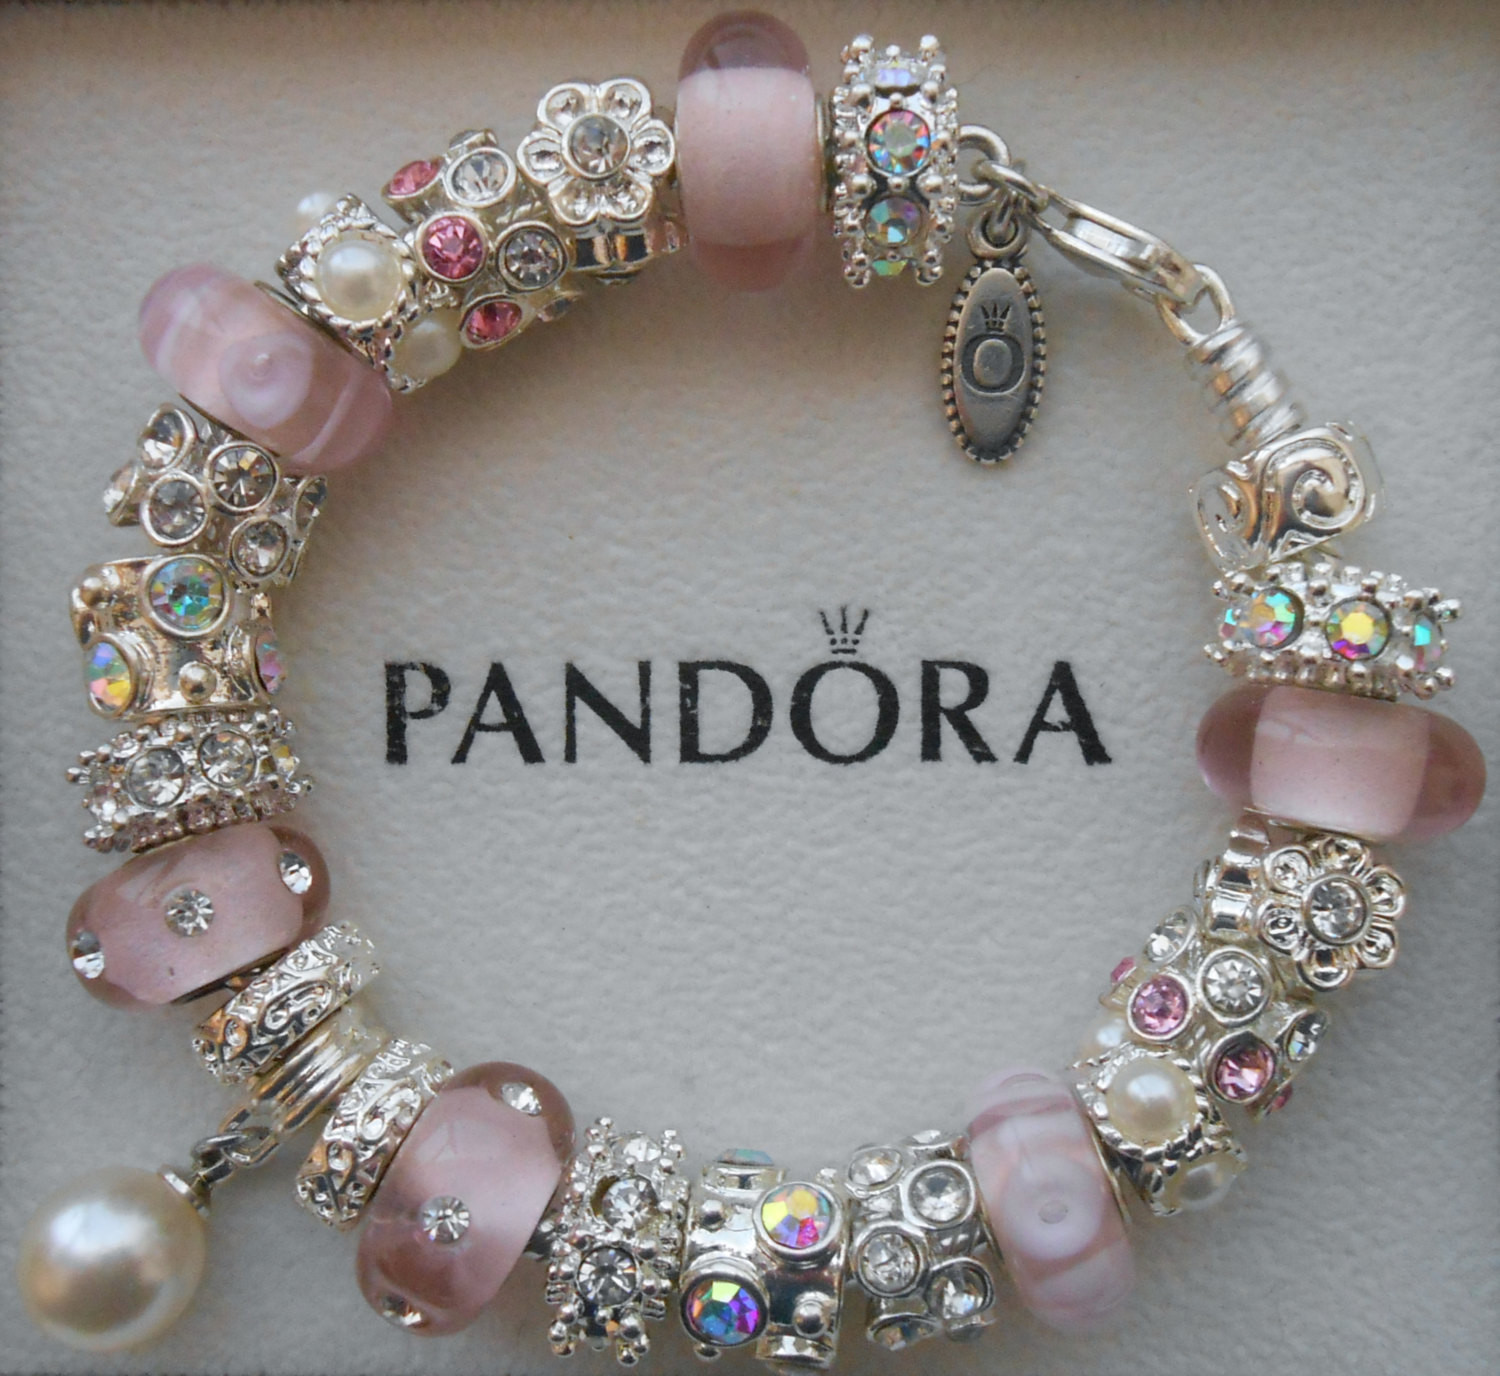 21 Of the Best Ideas for Pandora Bracelet Charm Home, Family, Style